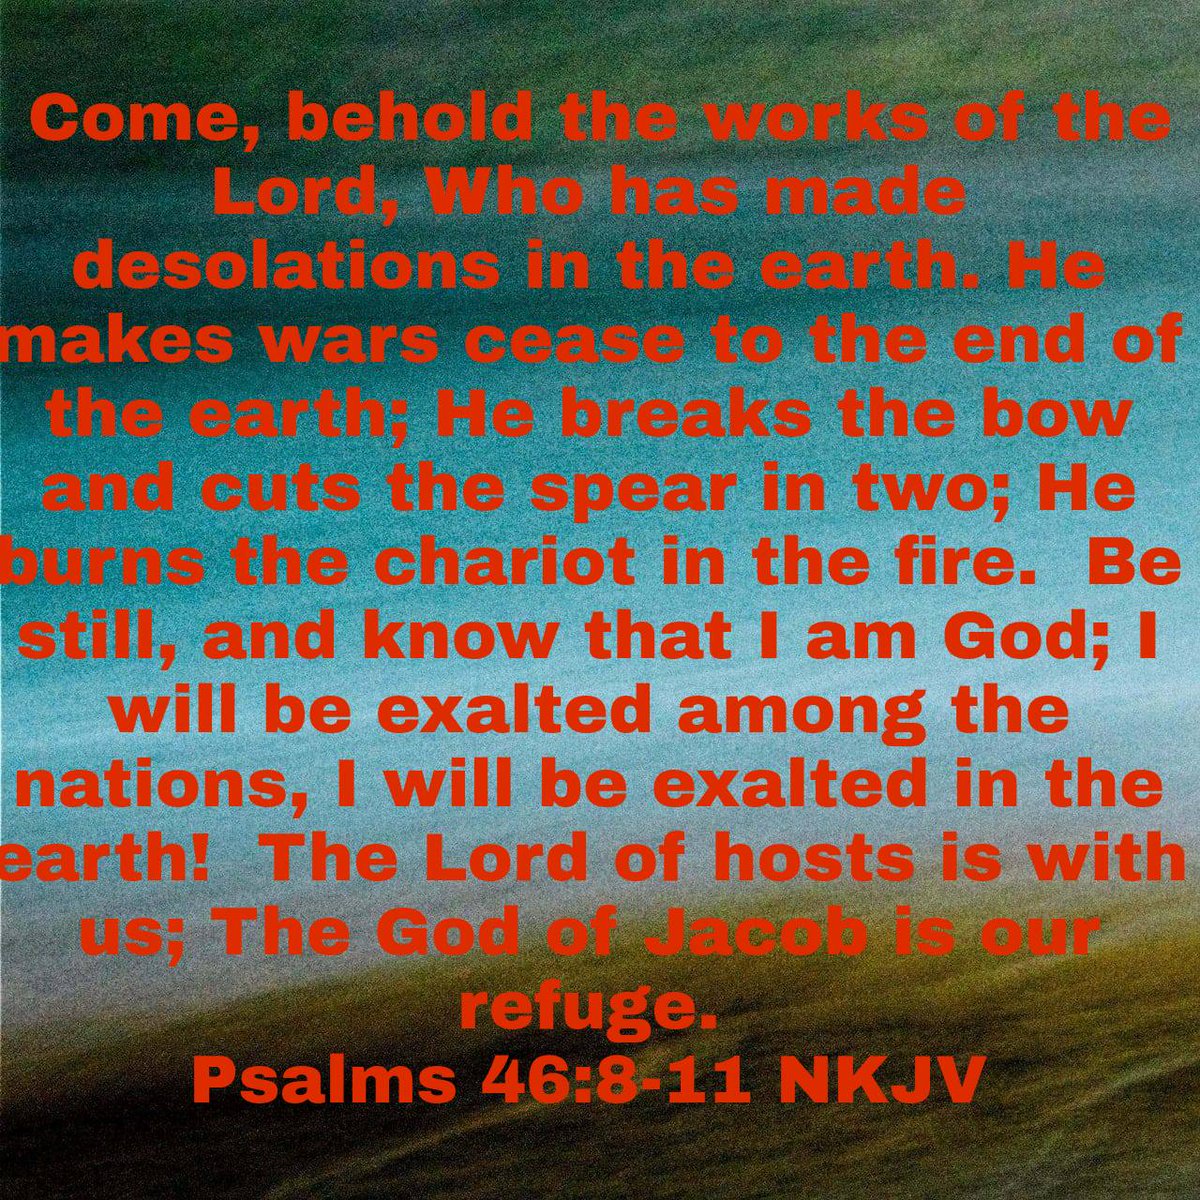 Psalms 46:8-11 NKJV [8] Come, behold the works of the Lord, Who has made desolations in the earth. [9] He makes wars cease to the end of the earth; He breaks the bow and cuts the spear in two; He burns the chariot in the fire. [10] Be still, and know that I am God; I will be